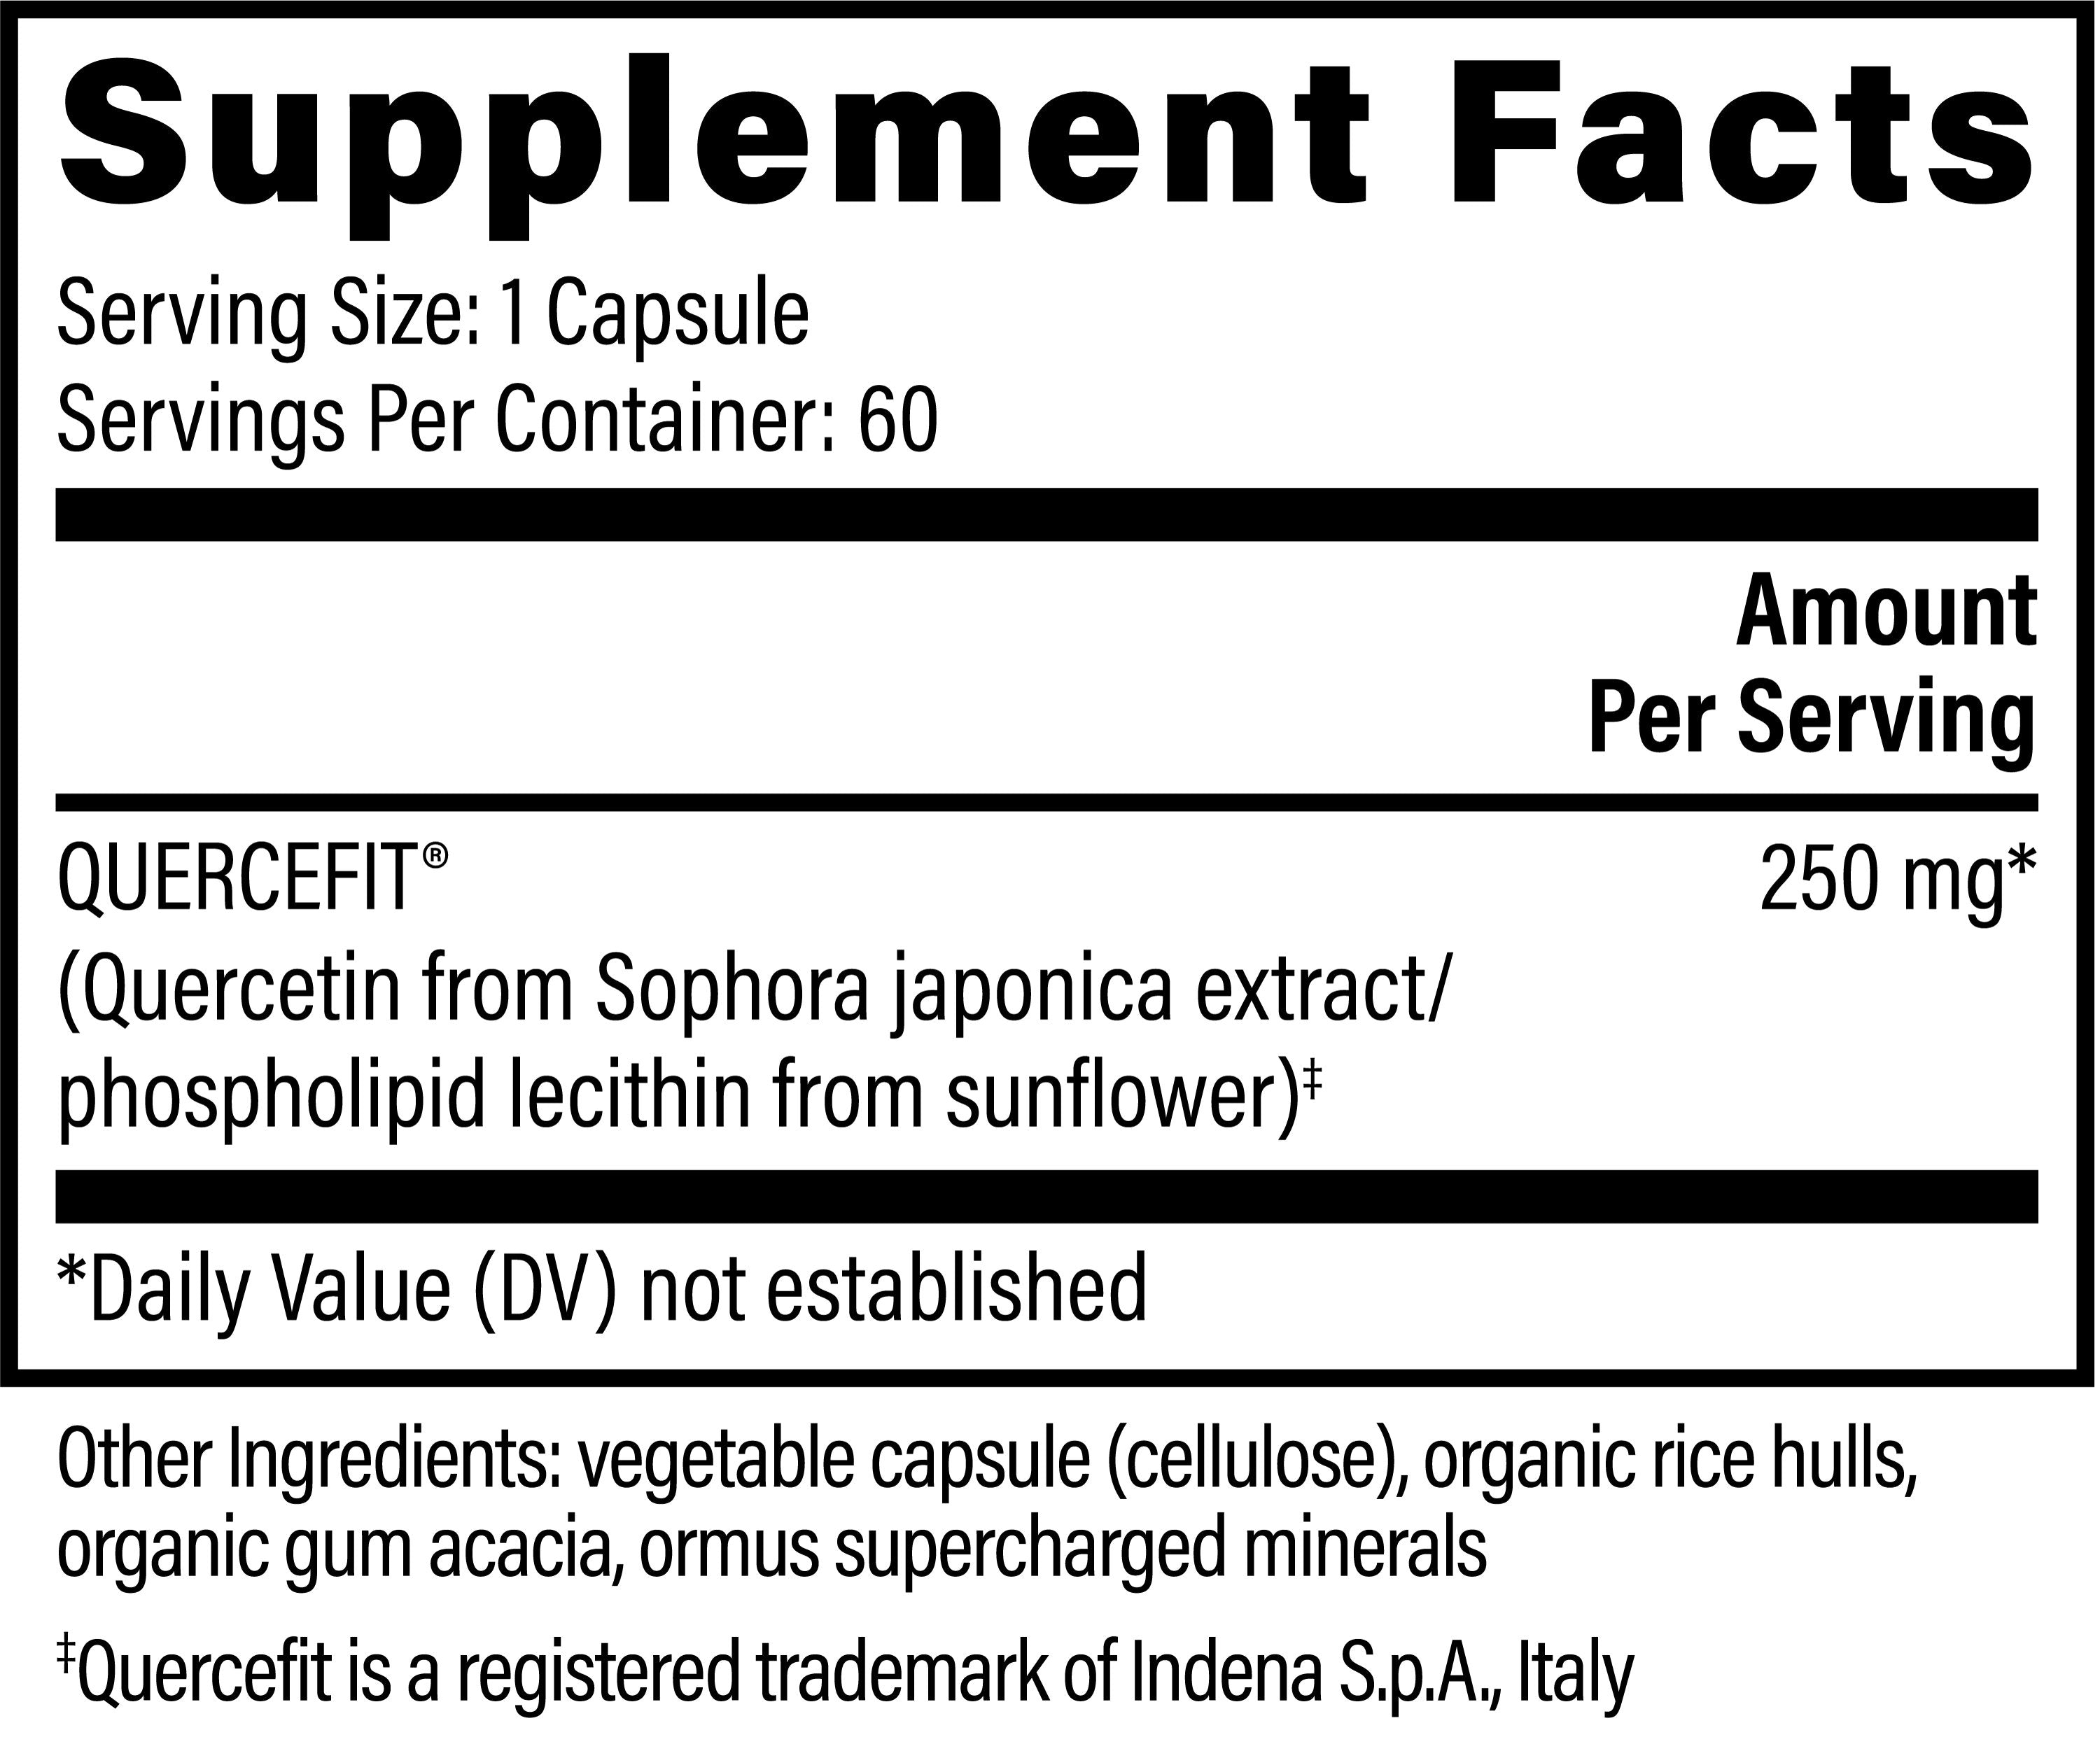 Global Healing Plant Based Quercetin Supplement Facts 60 Capsules